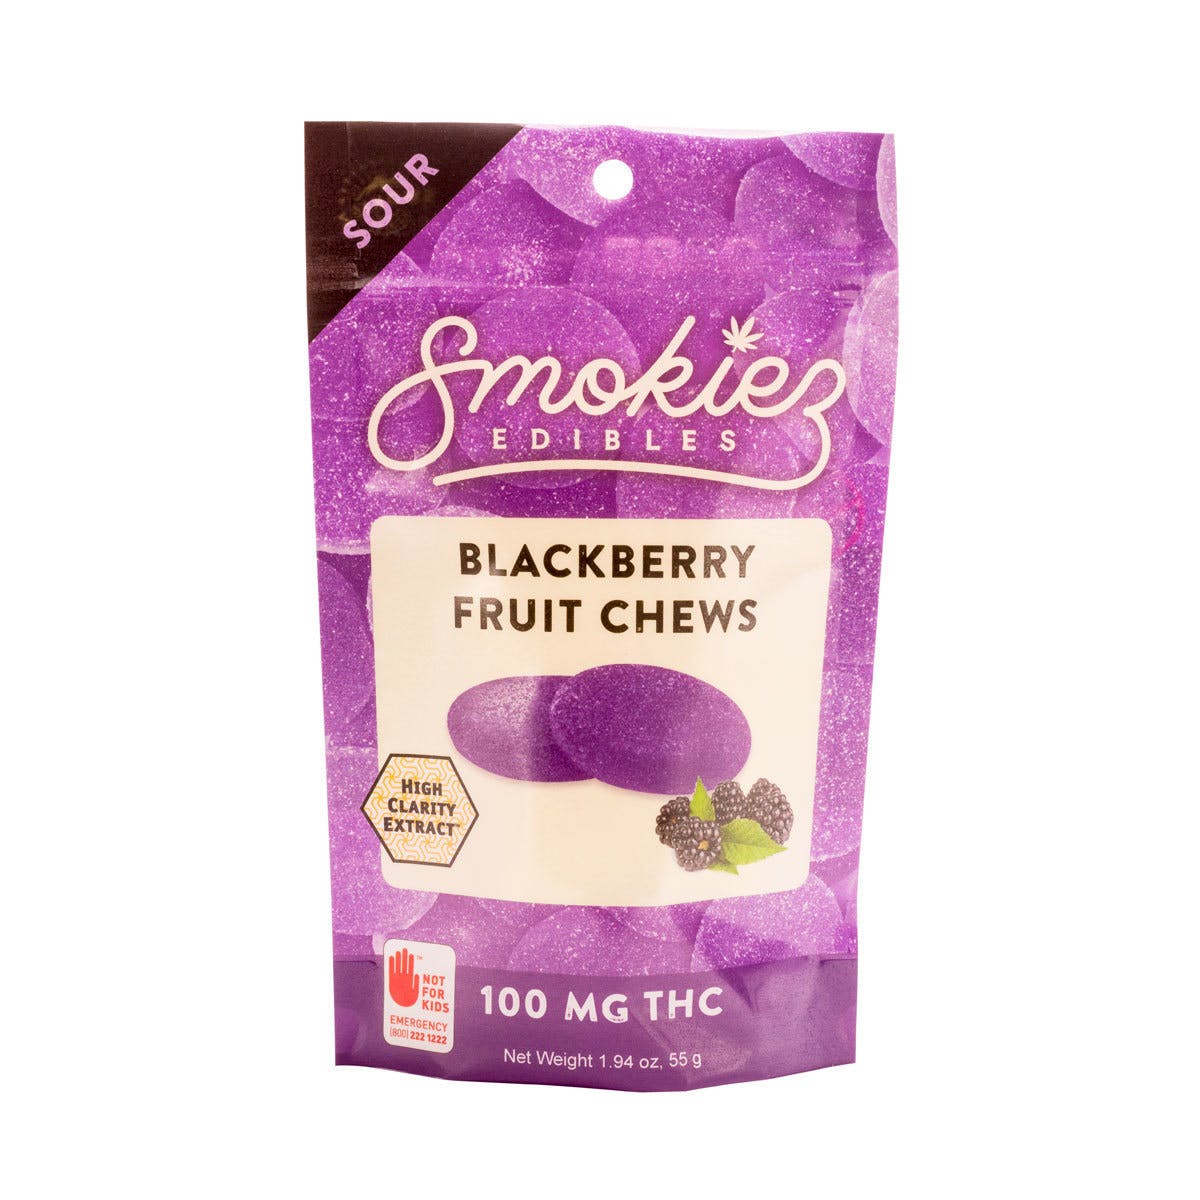 marijuana-dispensaries-compassion-union-in-north-hollywood-sour-blackberry-fruit-chews-2c-100-mg